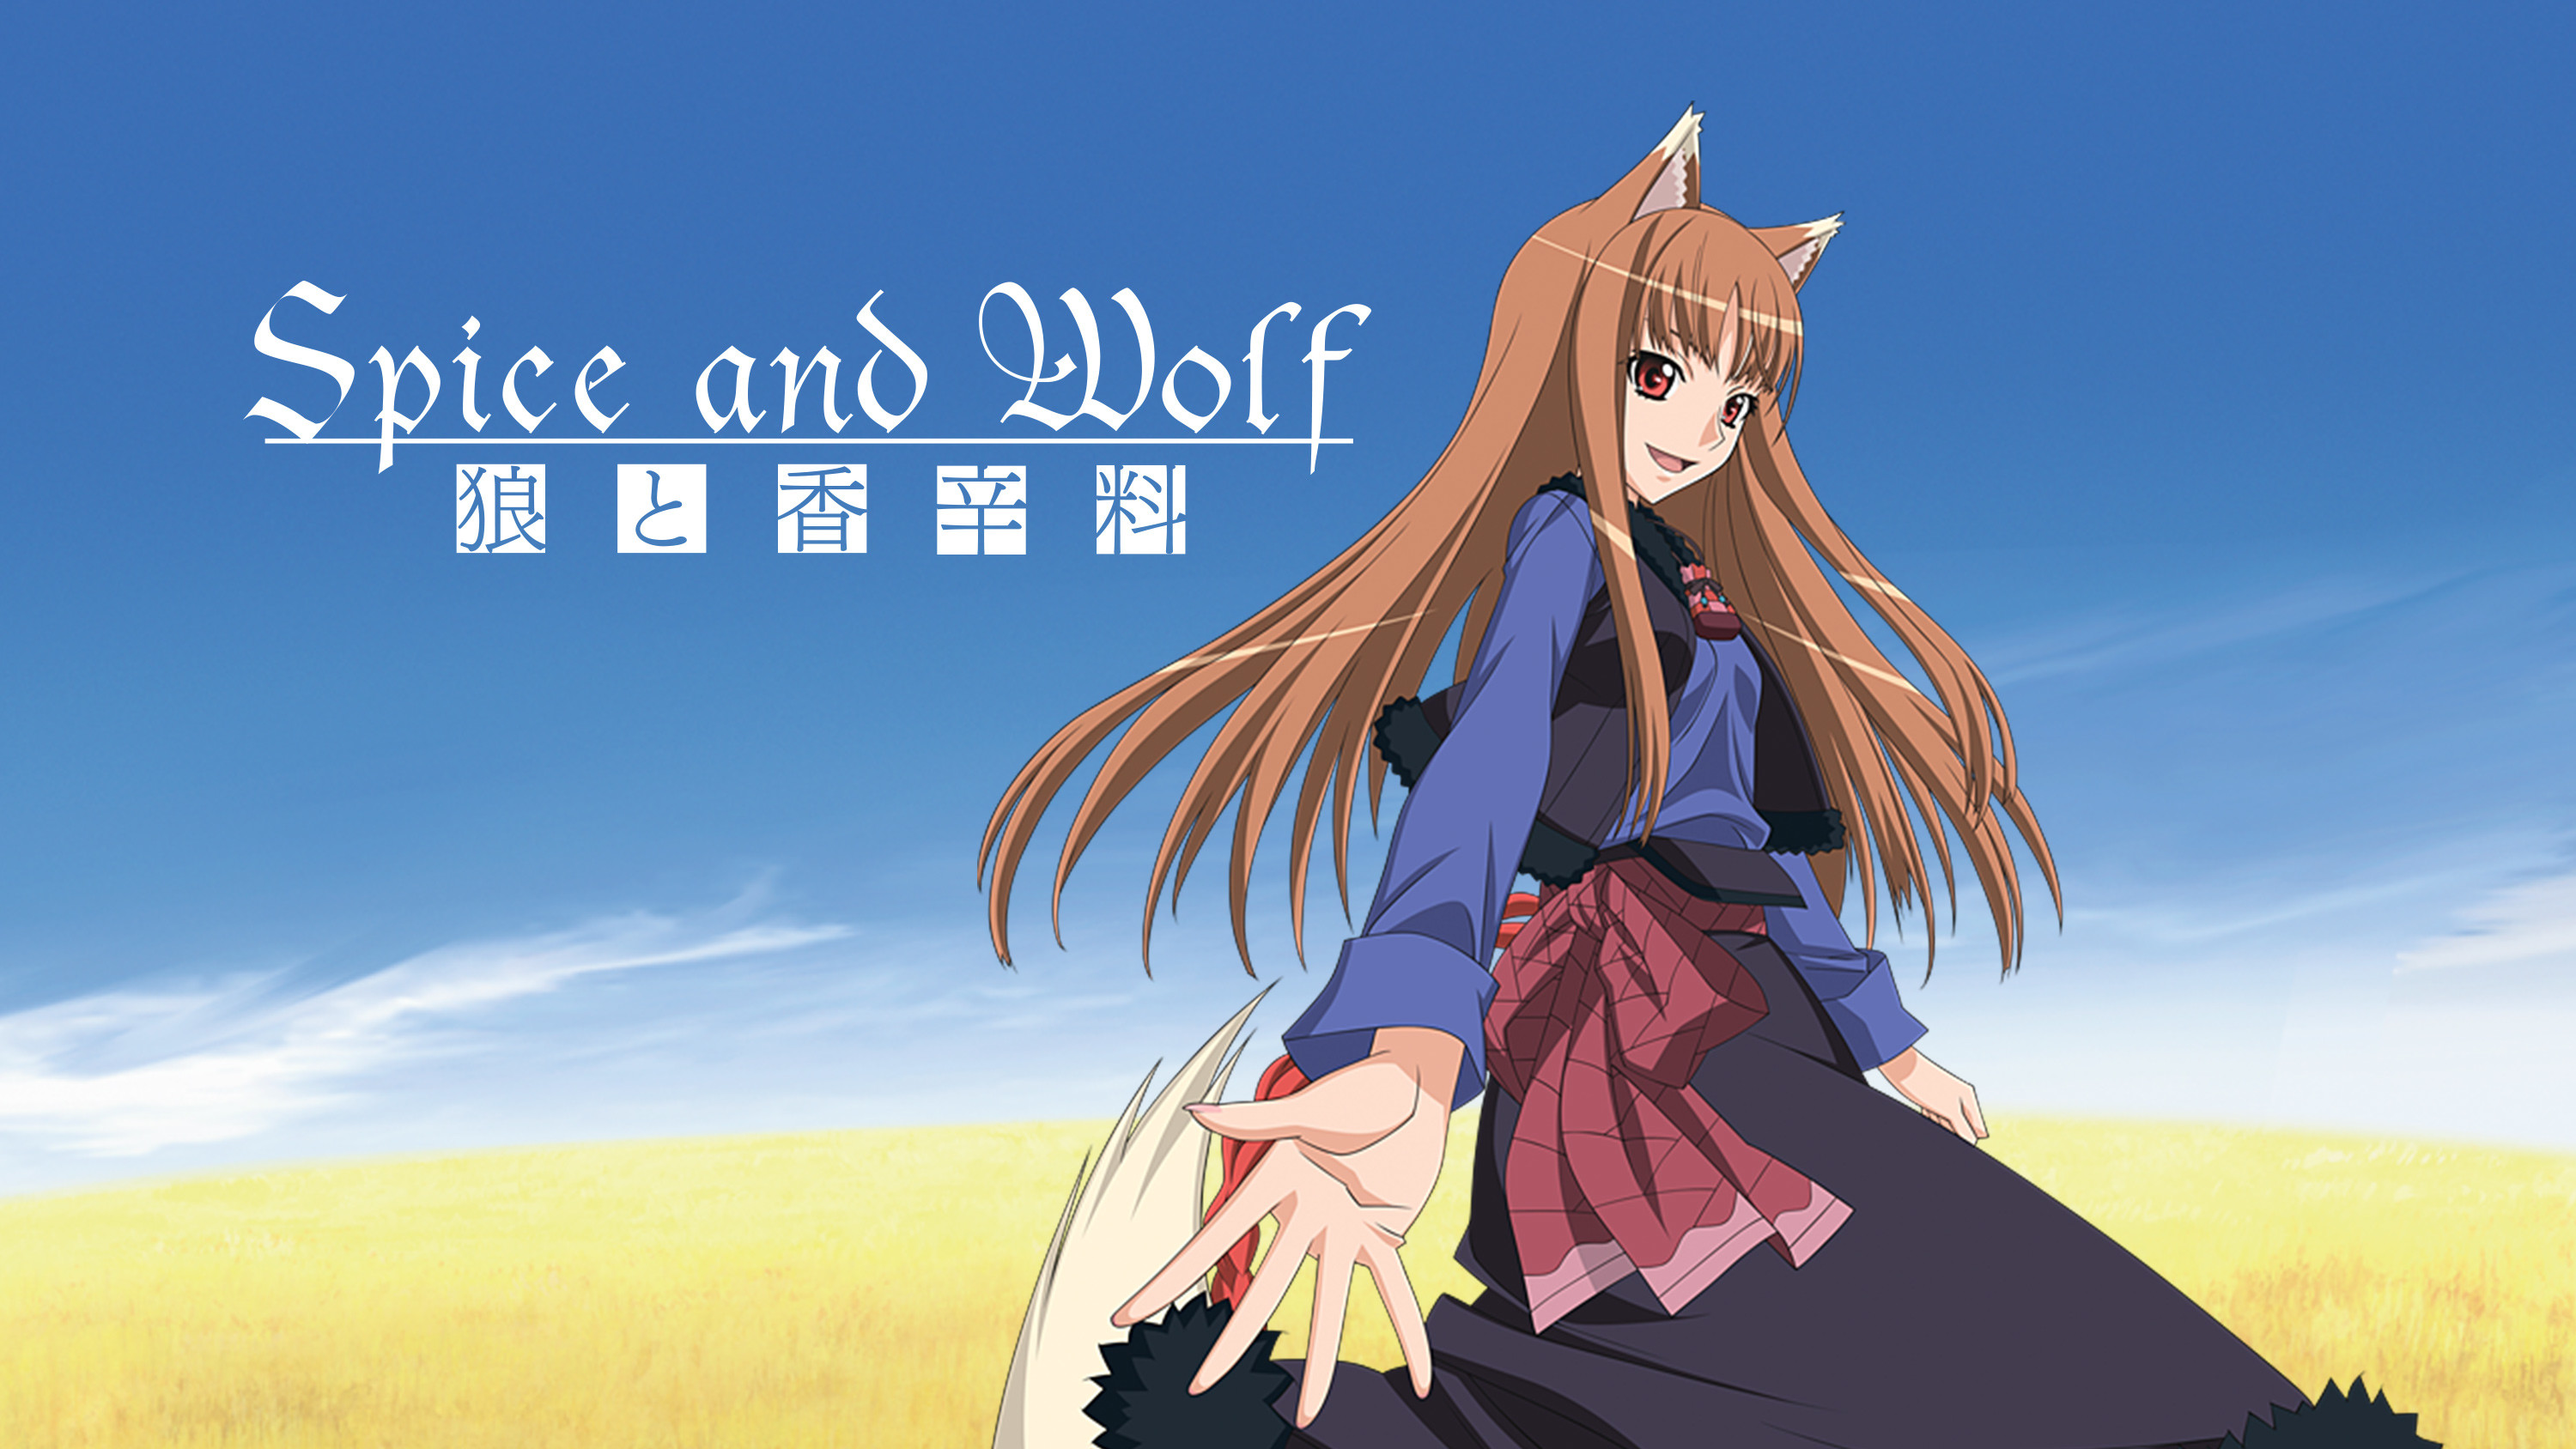 Anime Spice And Wolf Holo Wallpaper - Anime Holo Spice And Wolf - HD Wallpaper 